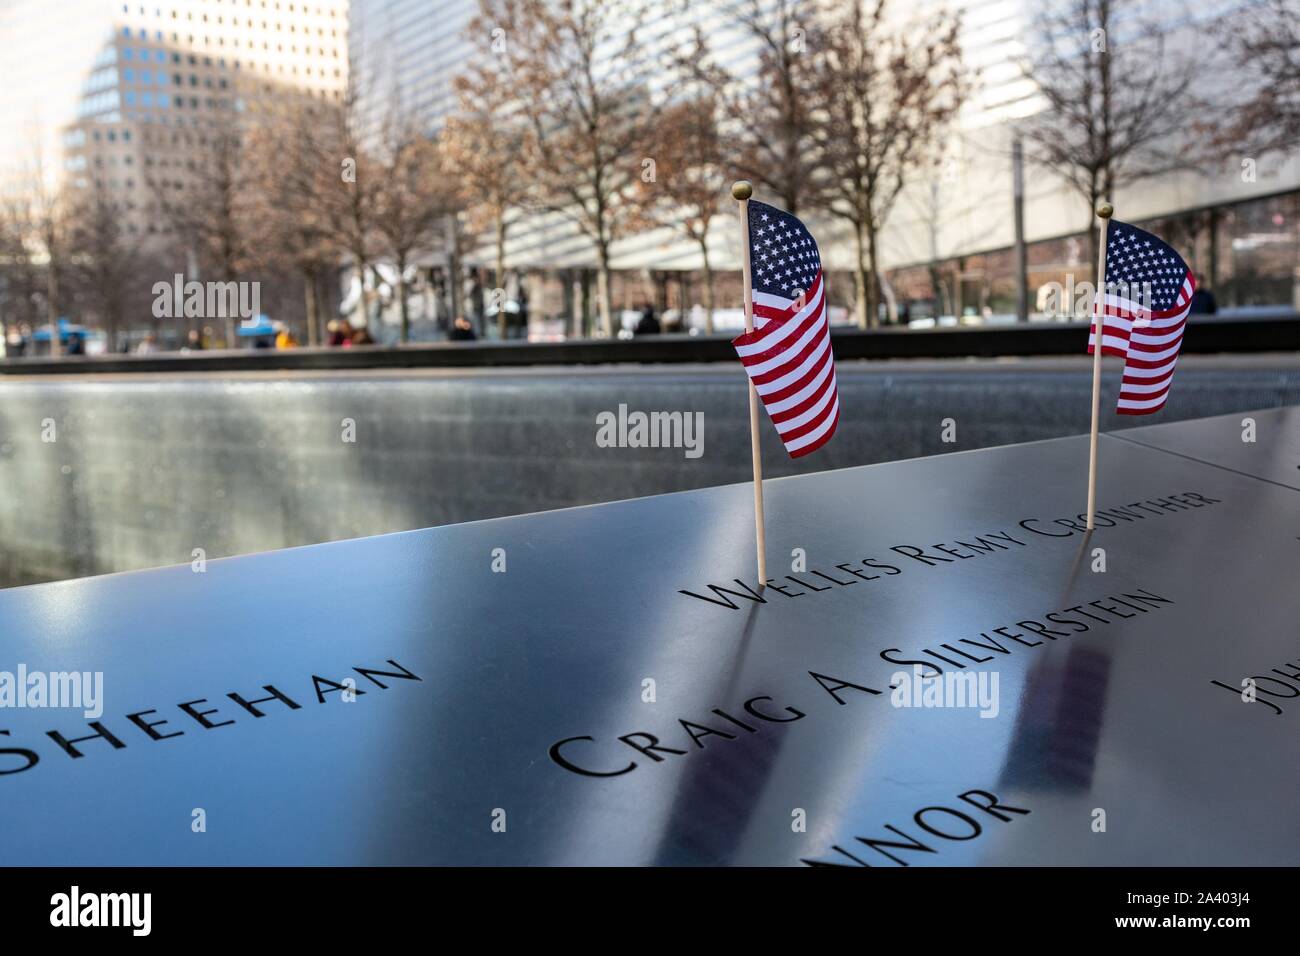 SEPTEMBER 11 COMMEMORATIVE PARK IN HONOR OF THE WORLD TRADE CENTER VICTIMS, MANHATTAN, NEW YORK, UNITED STATES, USA Stock Photo